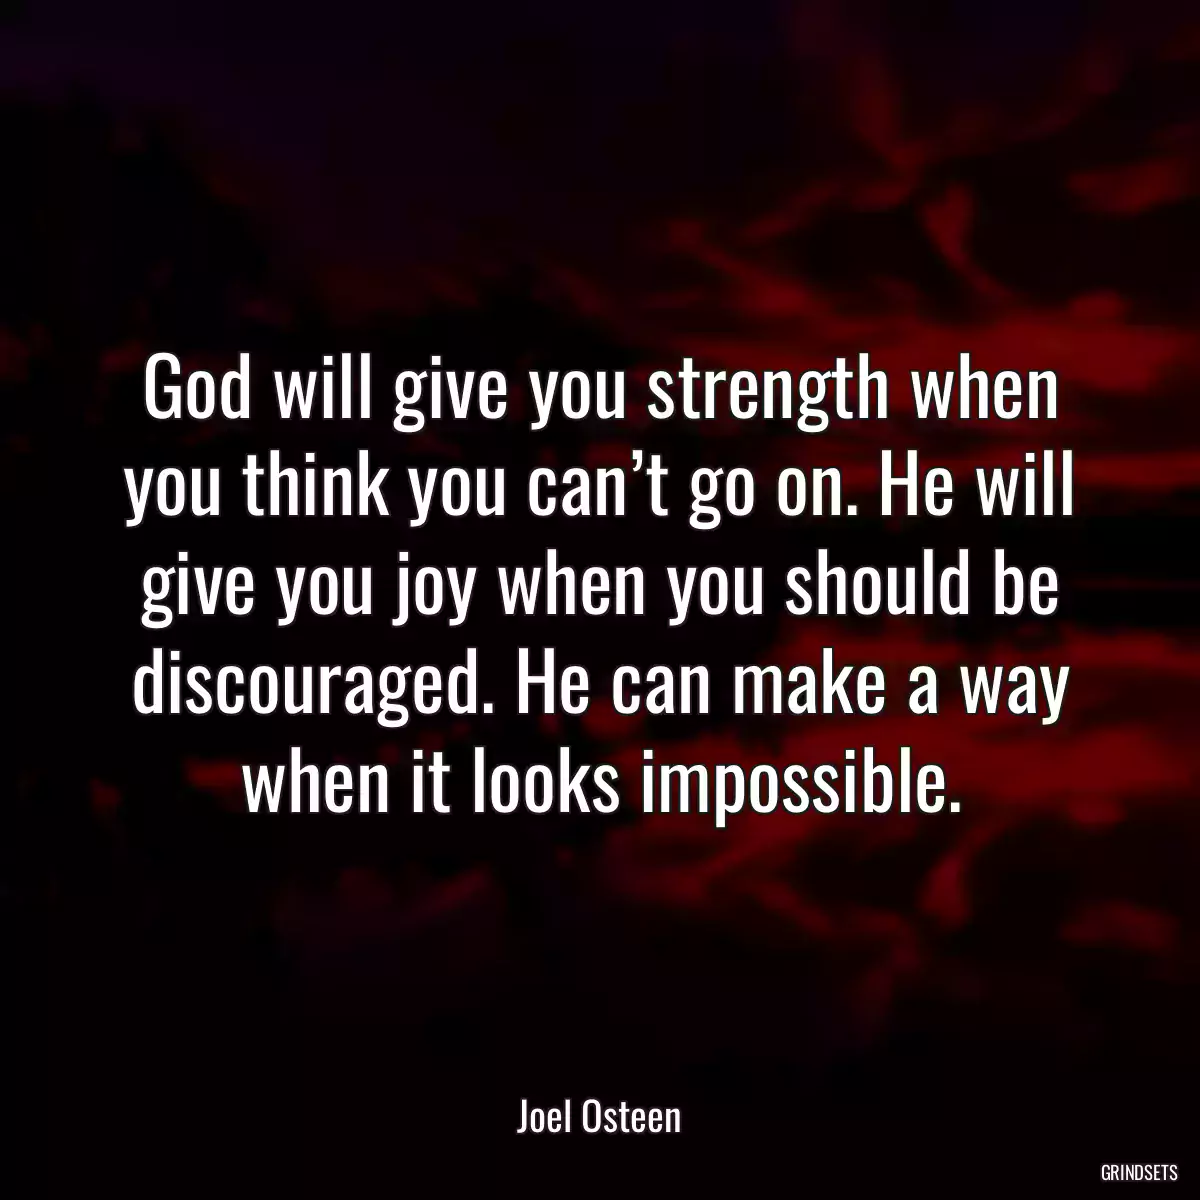 God will give you strength when you think you can’t go on. He will give you joy when you should be discouraged. He can make a way when it looks impossible.